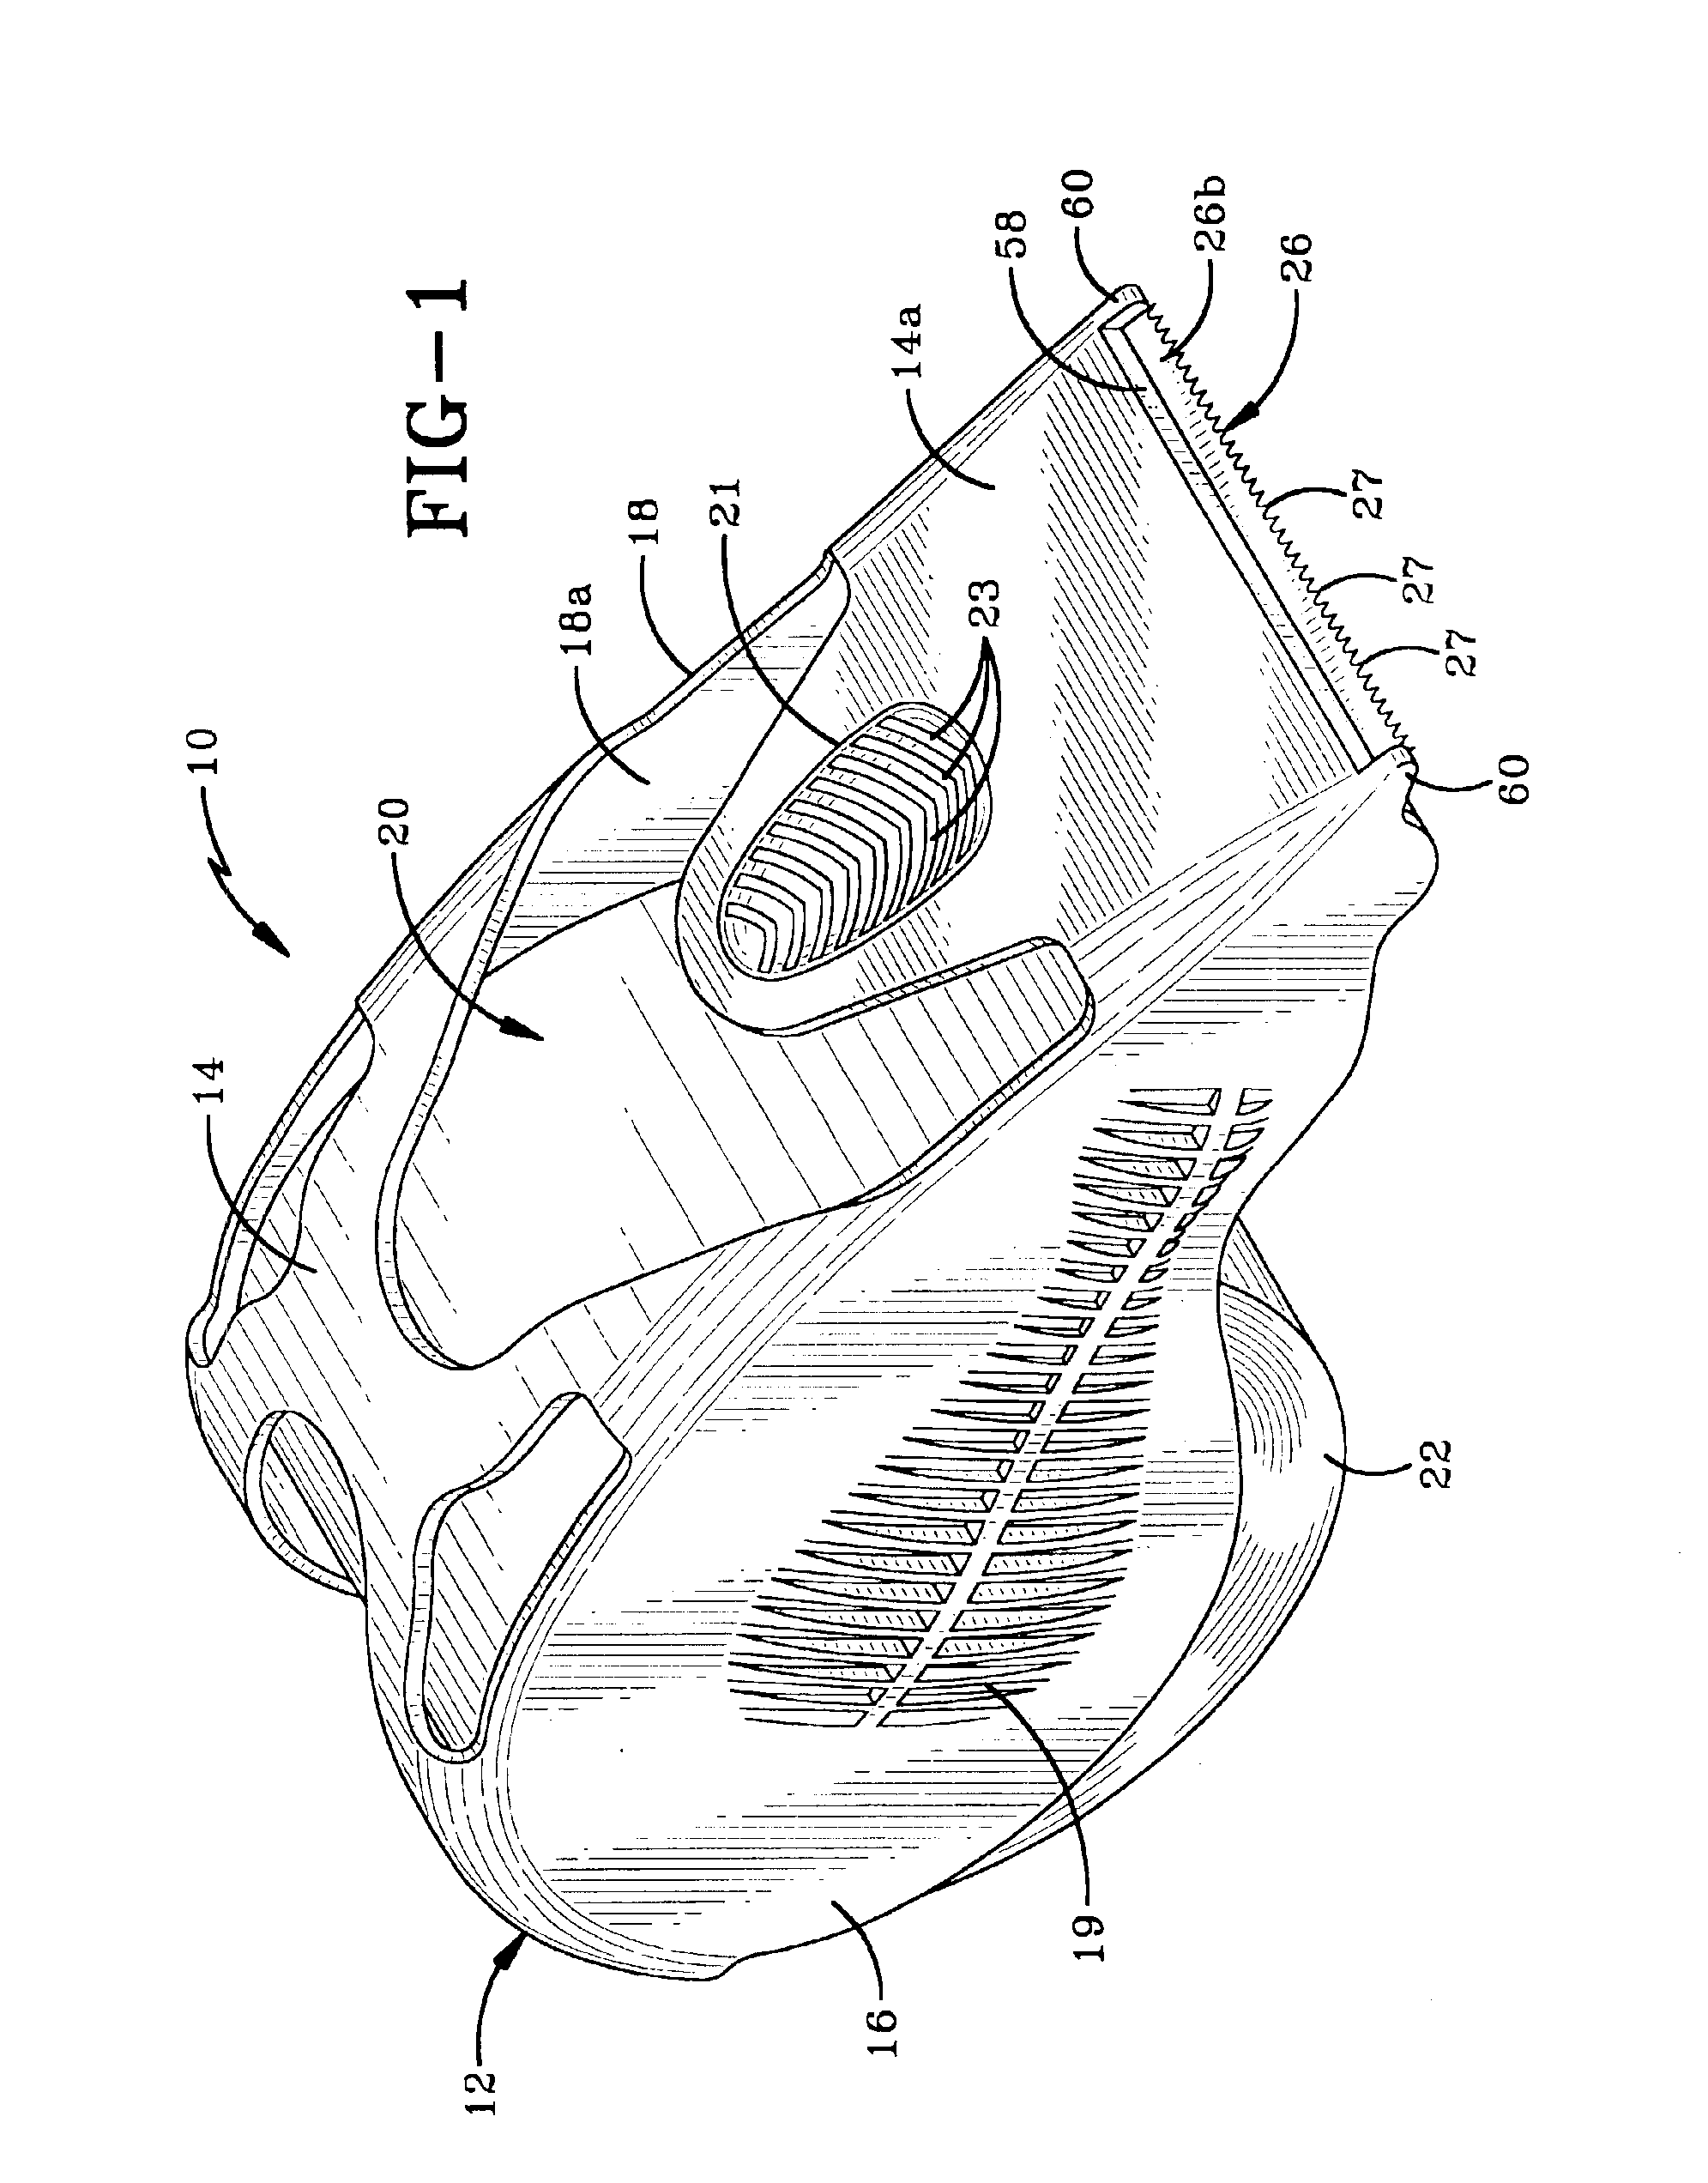 Tape dispenser having a tape retaining and application area